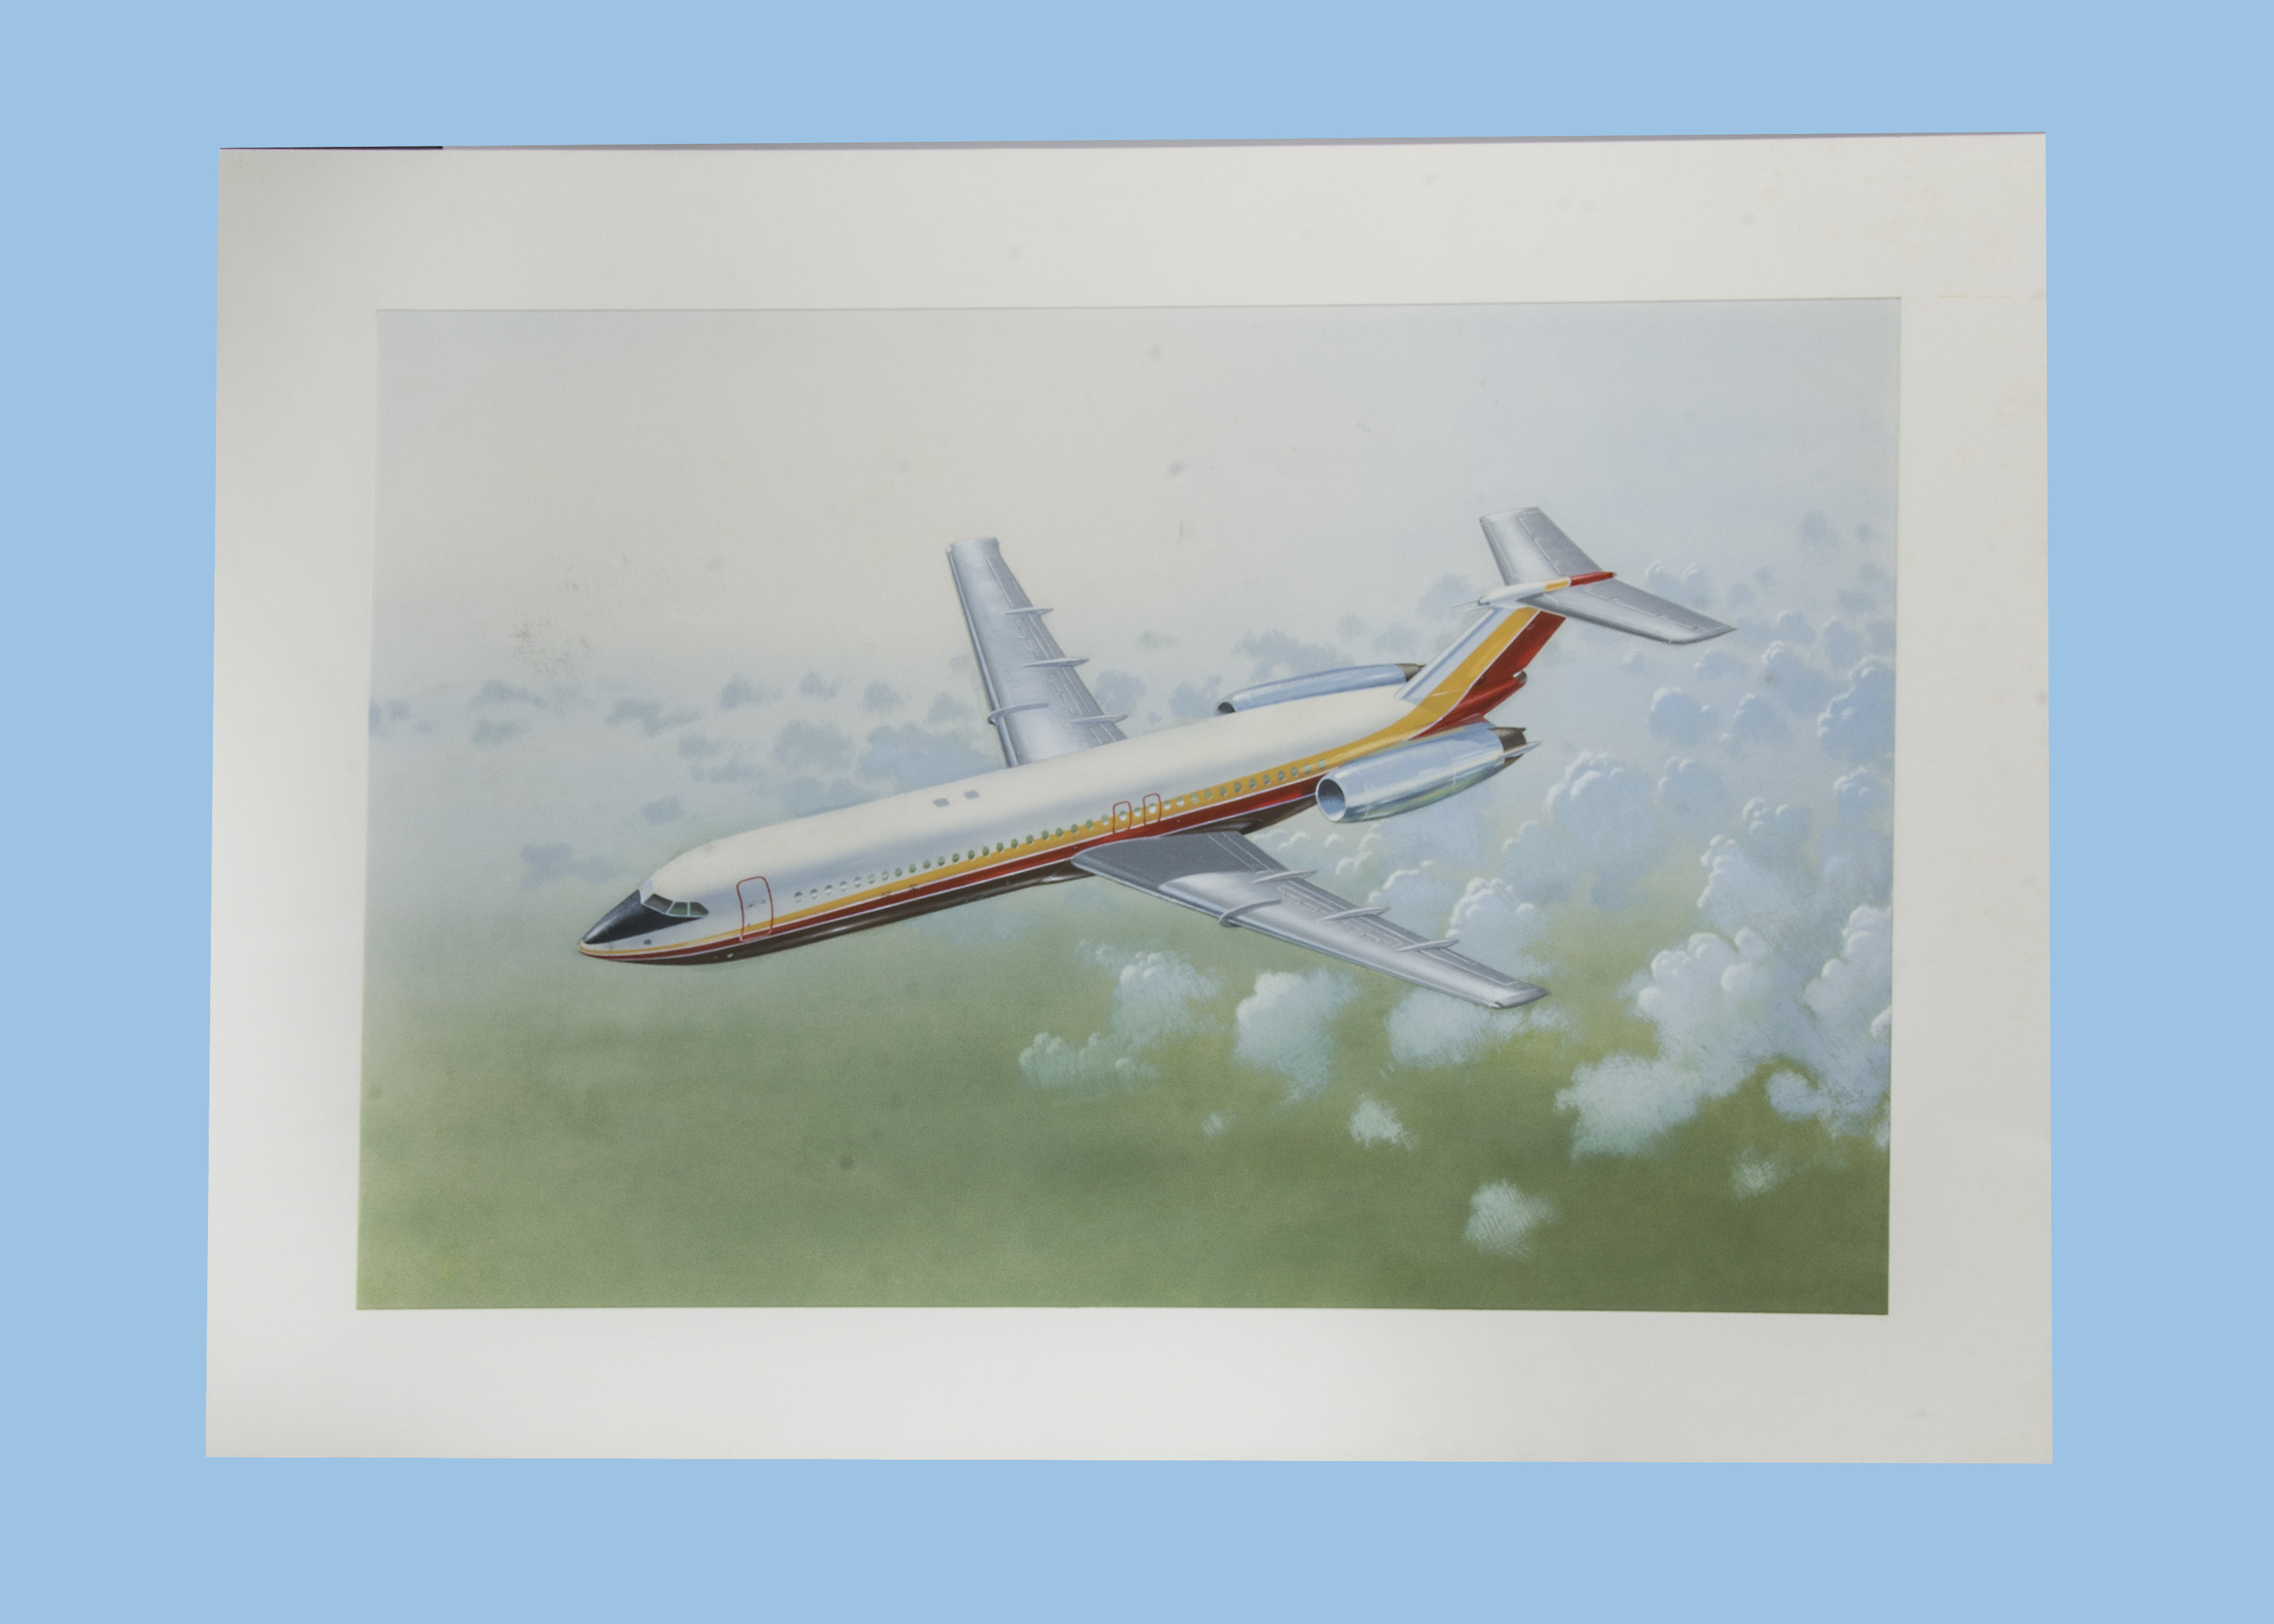 A 1960s or 1970s aviation artwork by Keith Broomfield, the well painted gouache and airbrushed image